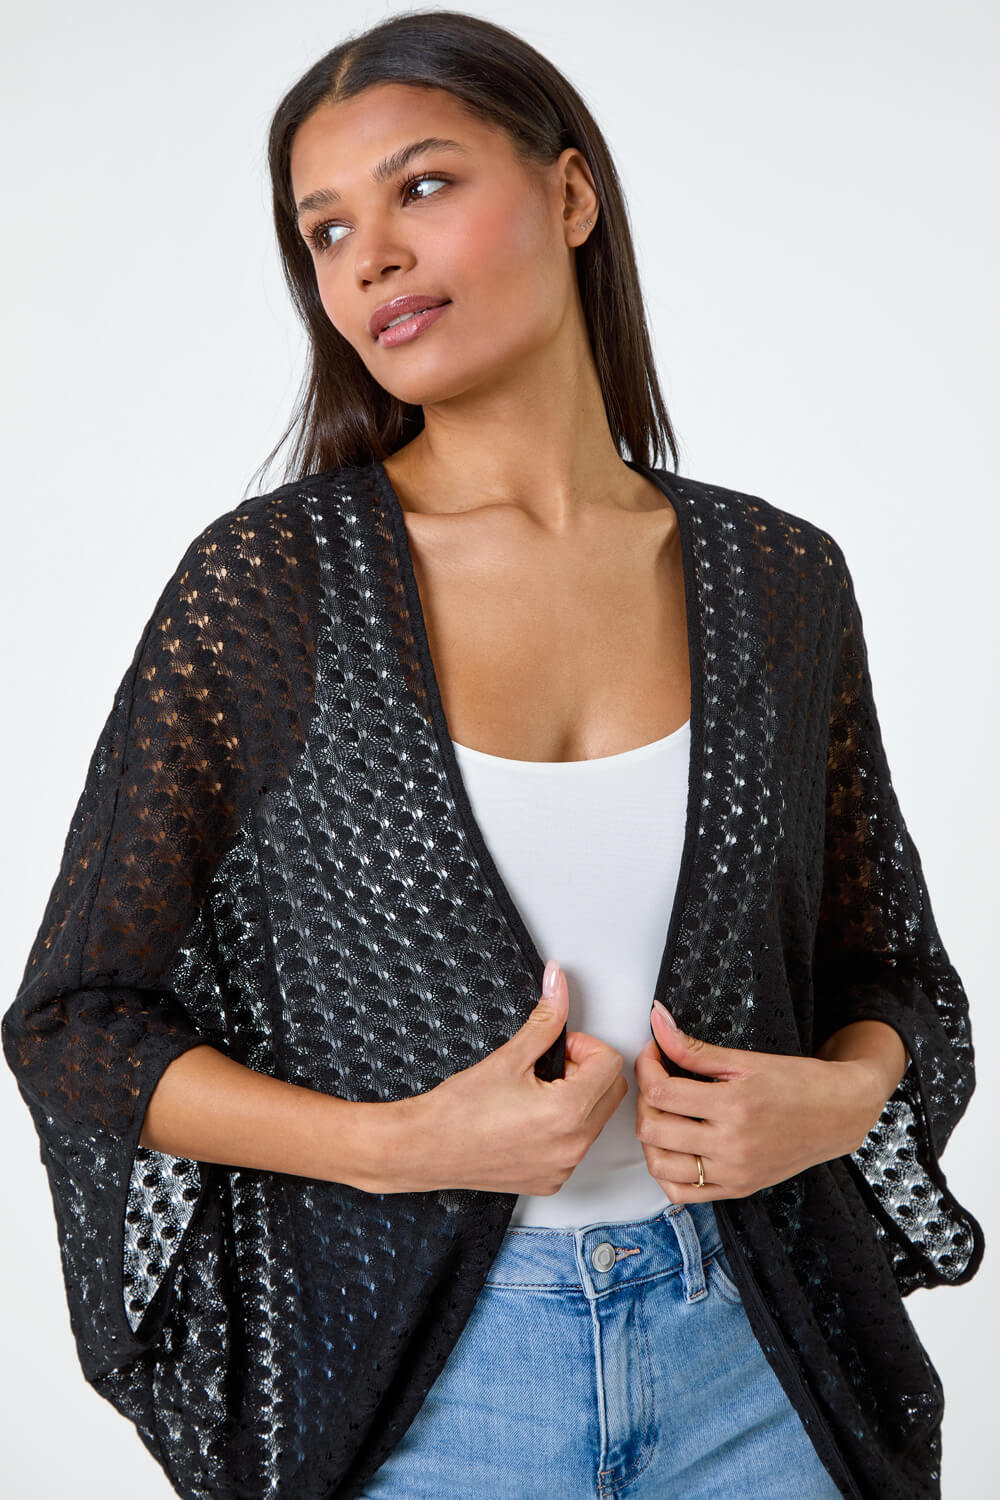 Black Textured Knit Cardigan Cover Up, Image 4 of 5